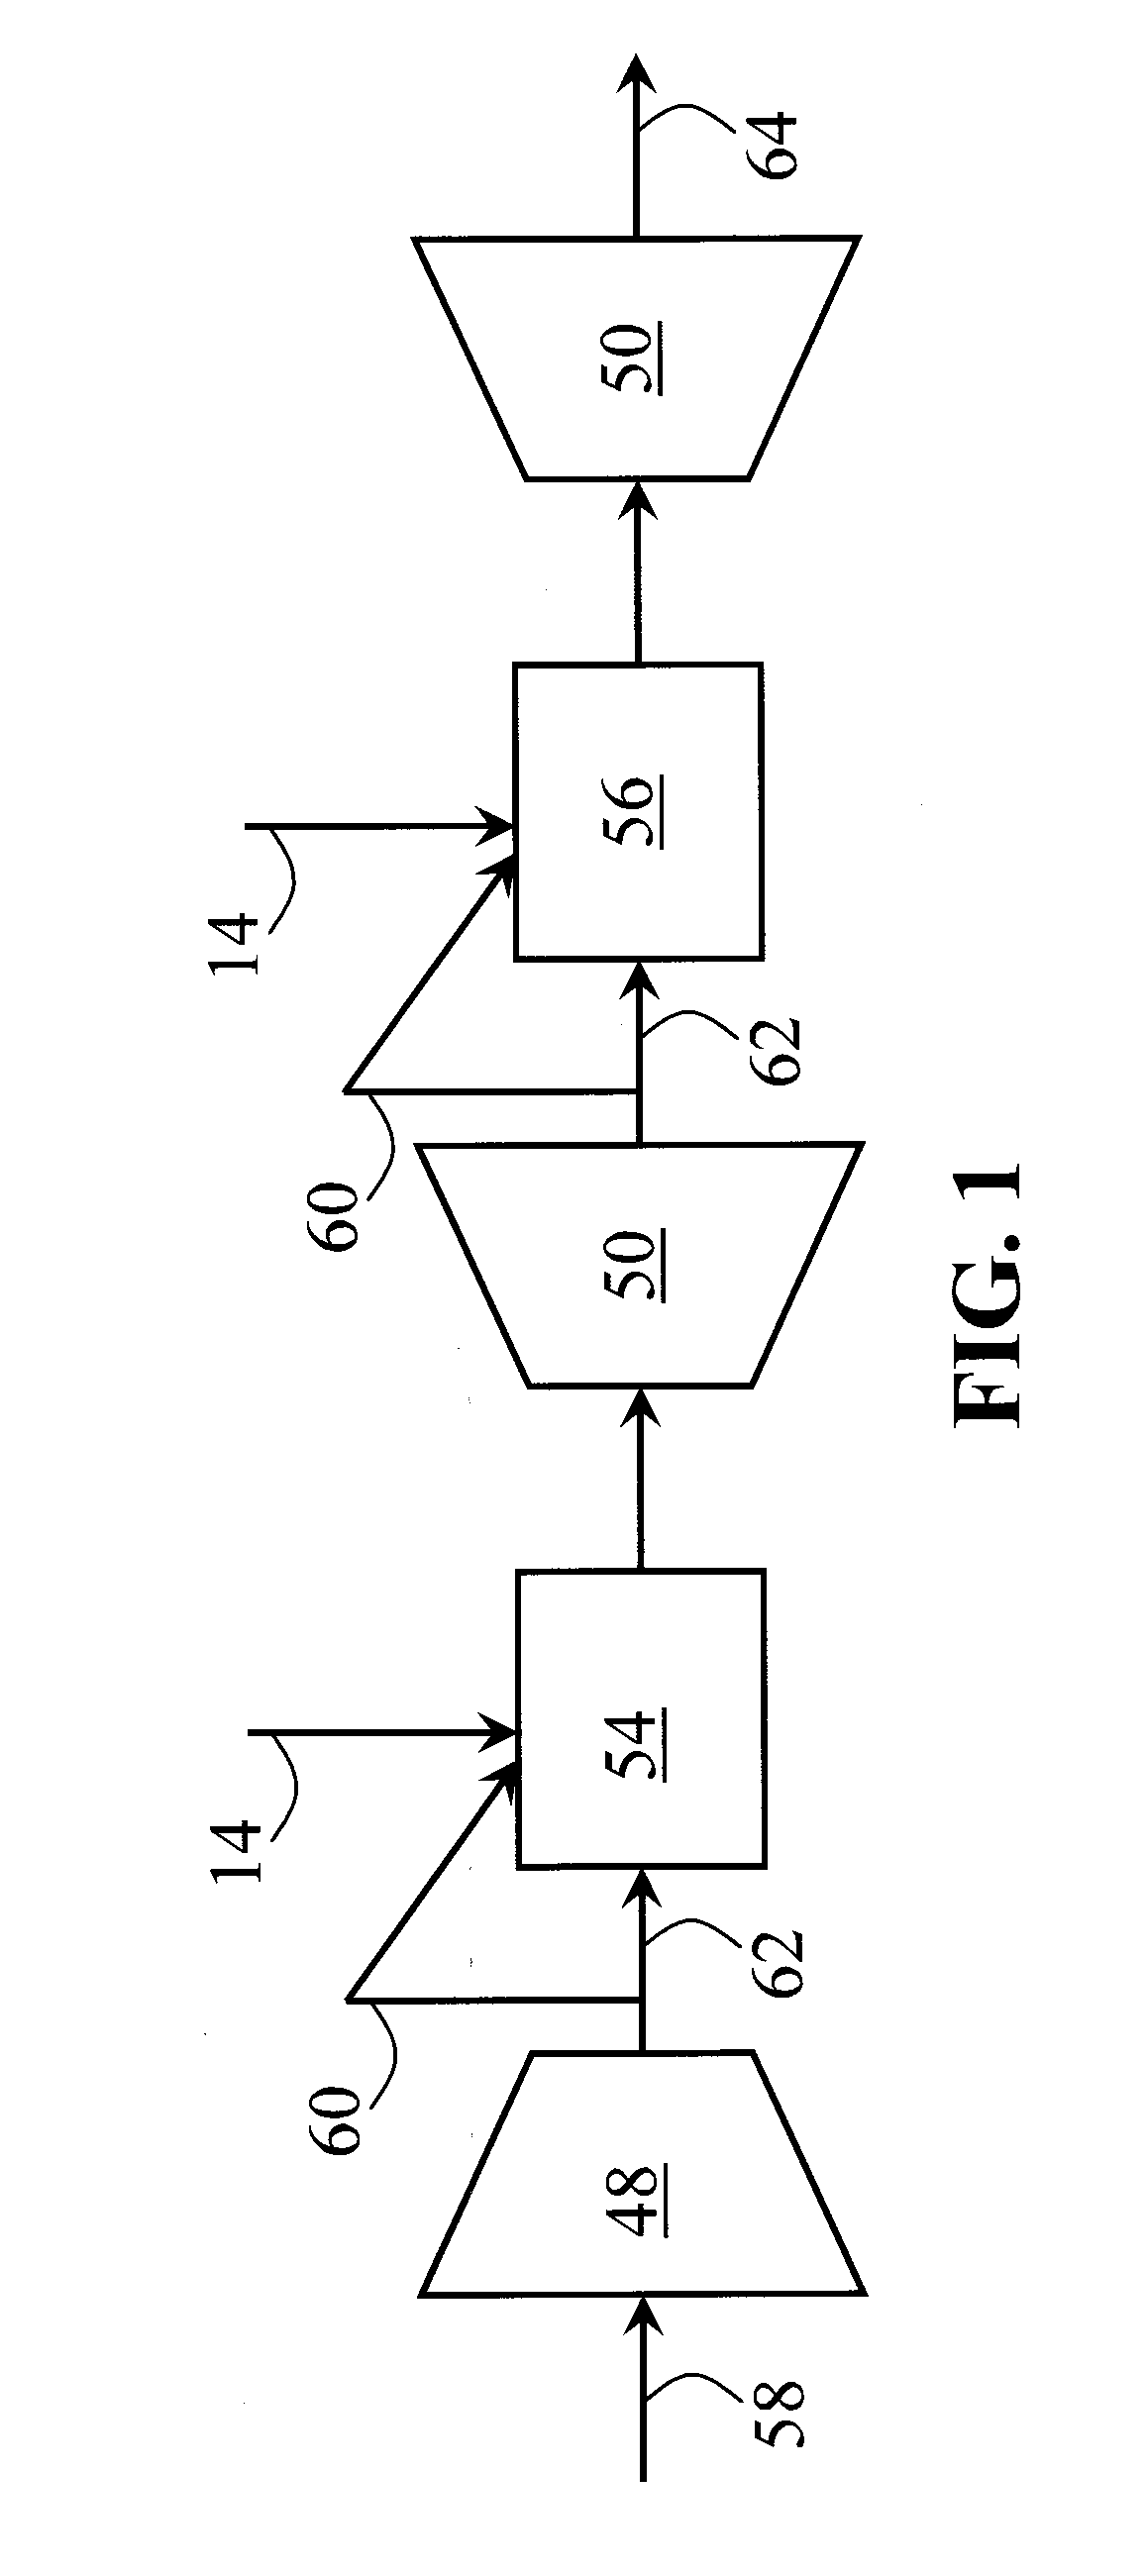 Apparatus and method for a gas turbine entrainment system